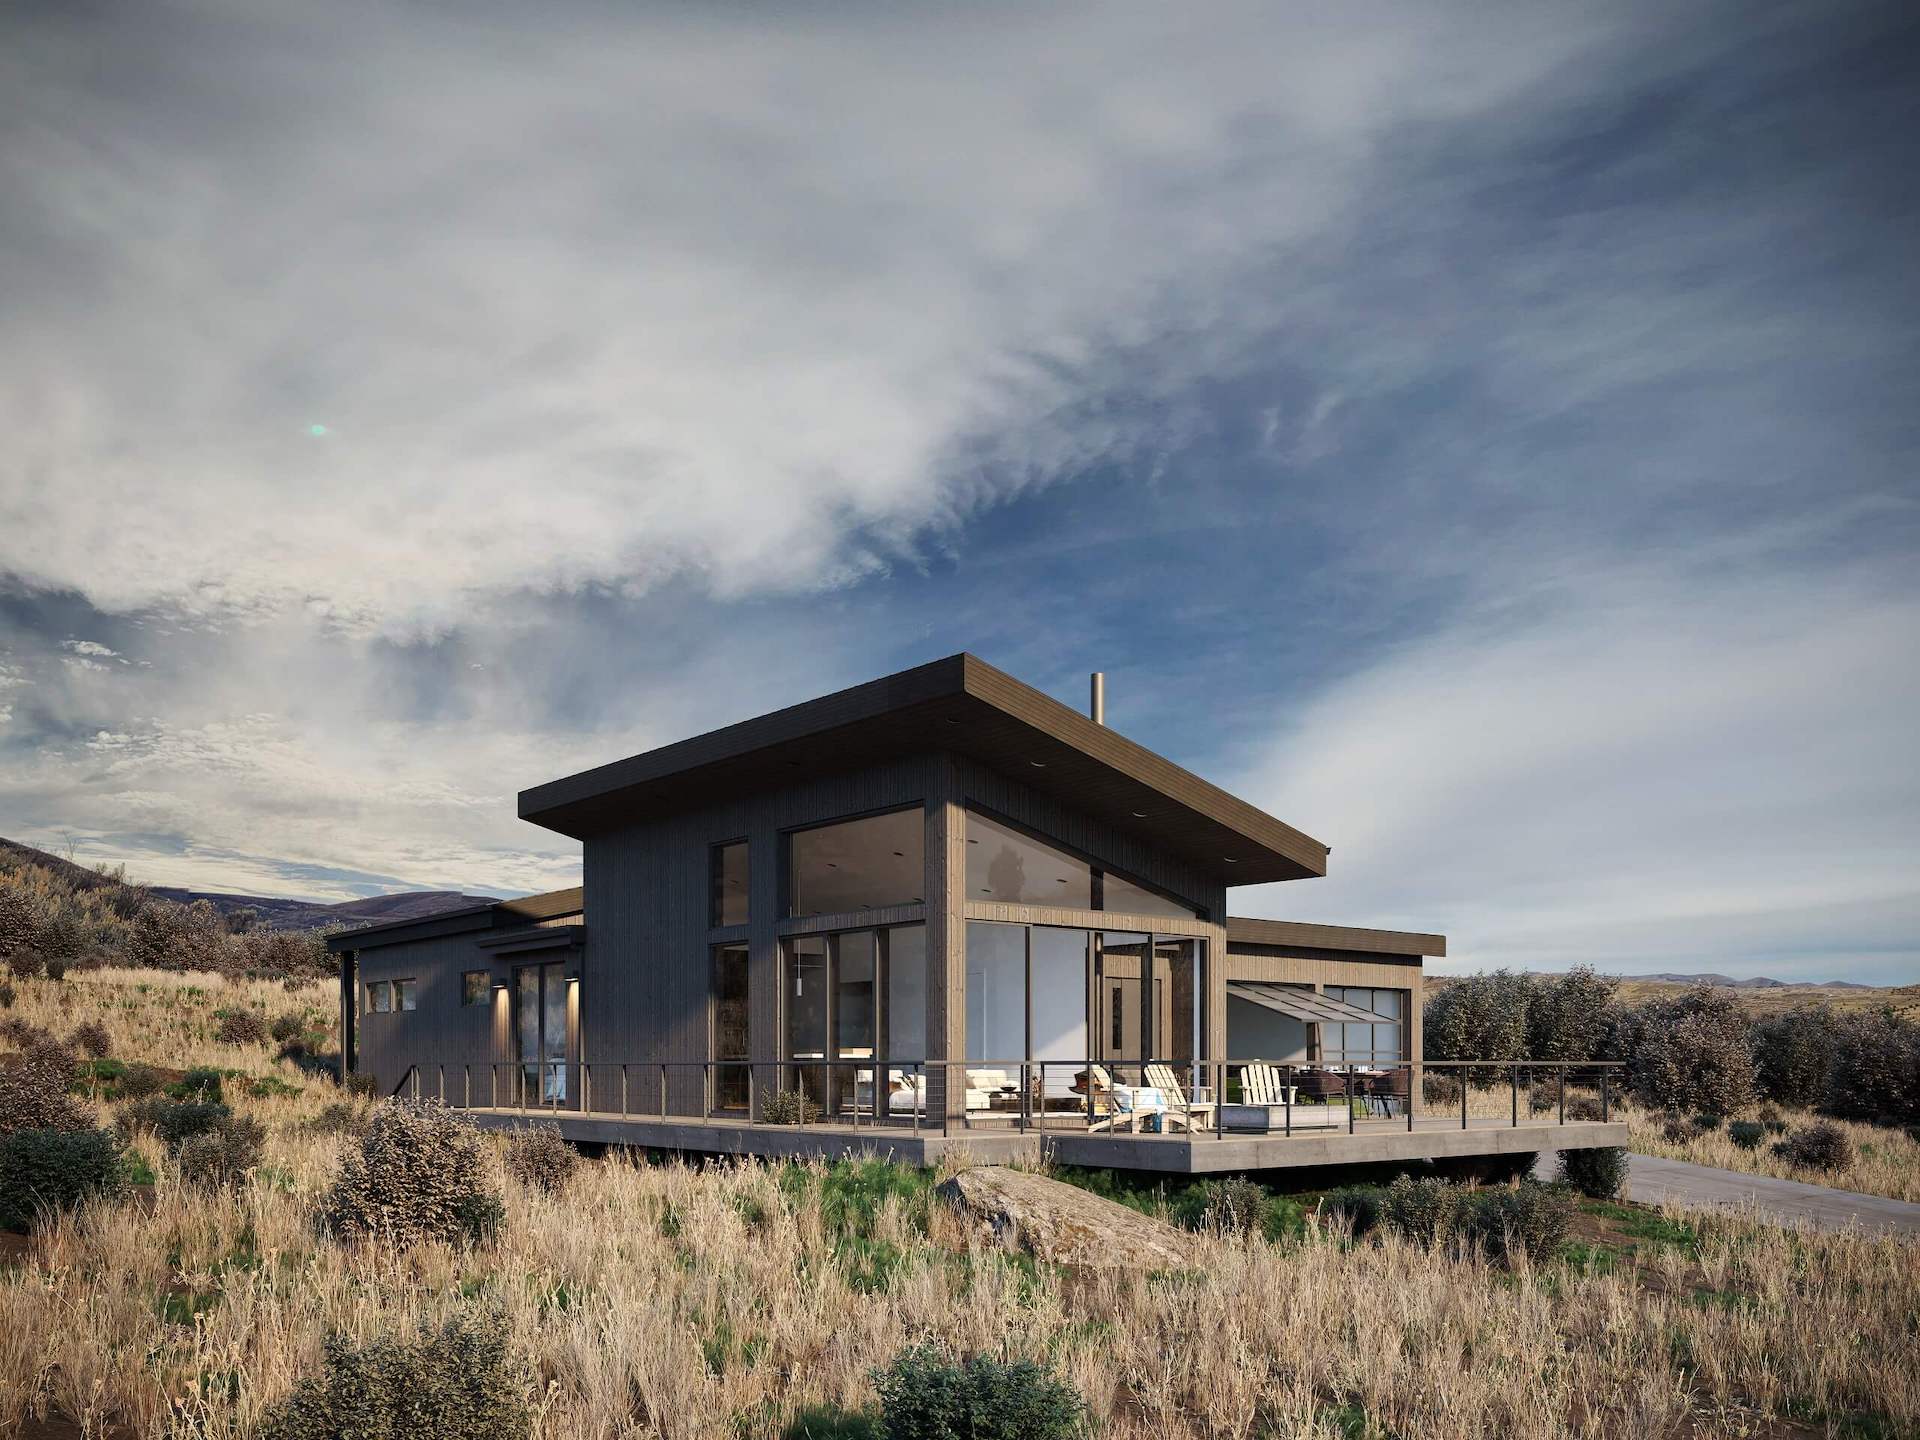 3D Architectural Visualization for a Project Presentation in Utah